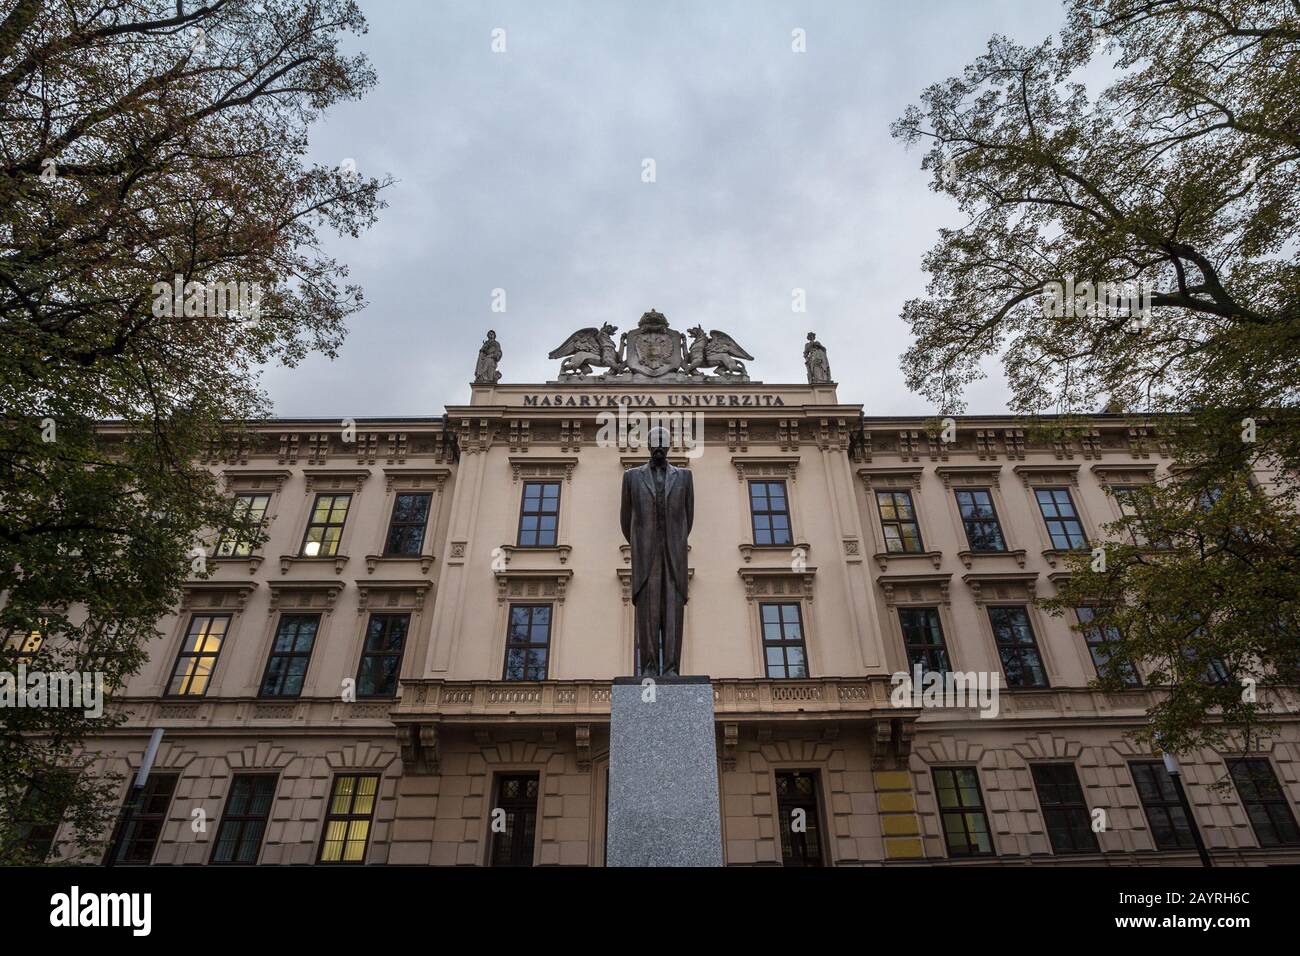 Main building of Masarykova Univerzita, or Masaryk University in Brno,  Czechia, with a statue of Tomas Garrigue Masaryk inaugurated in the 1930s.  This Stock Photo - Alamy